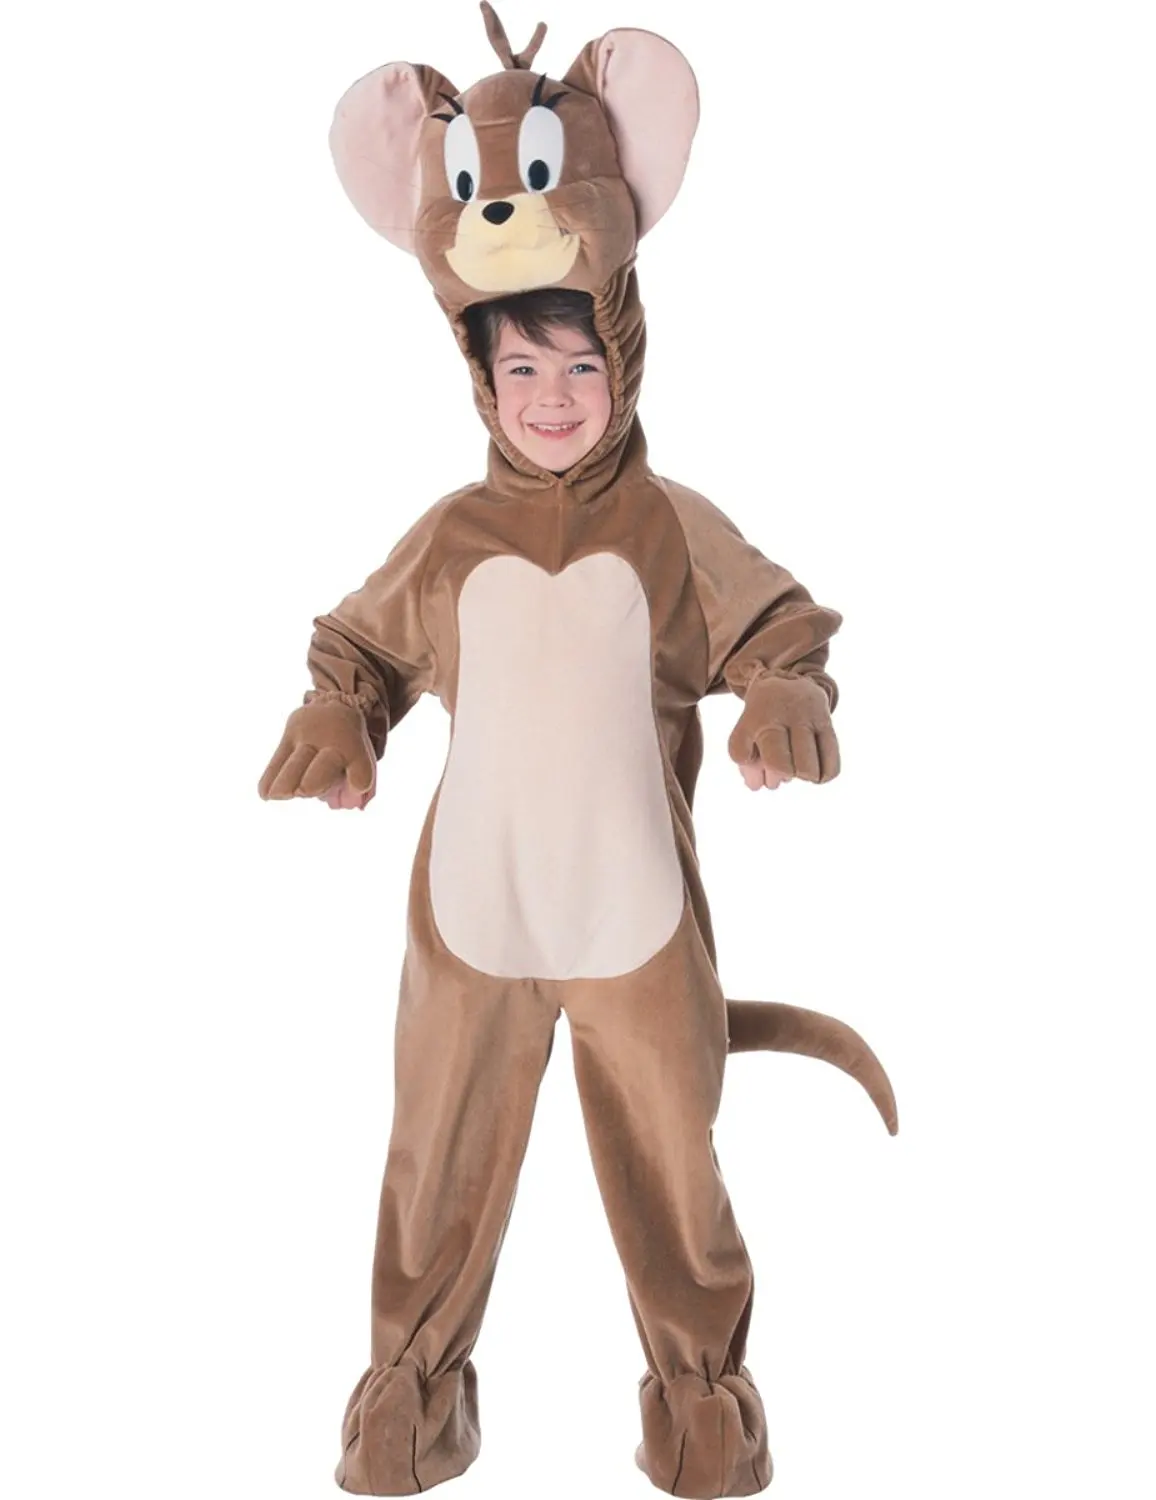 48.92. Tom n Jerry - Jerry Child Halloween Costume Size 4-6 Small. 